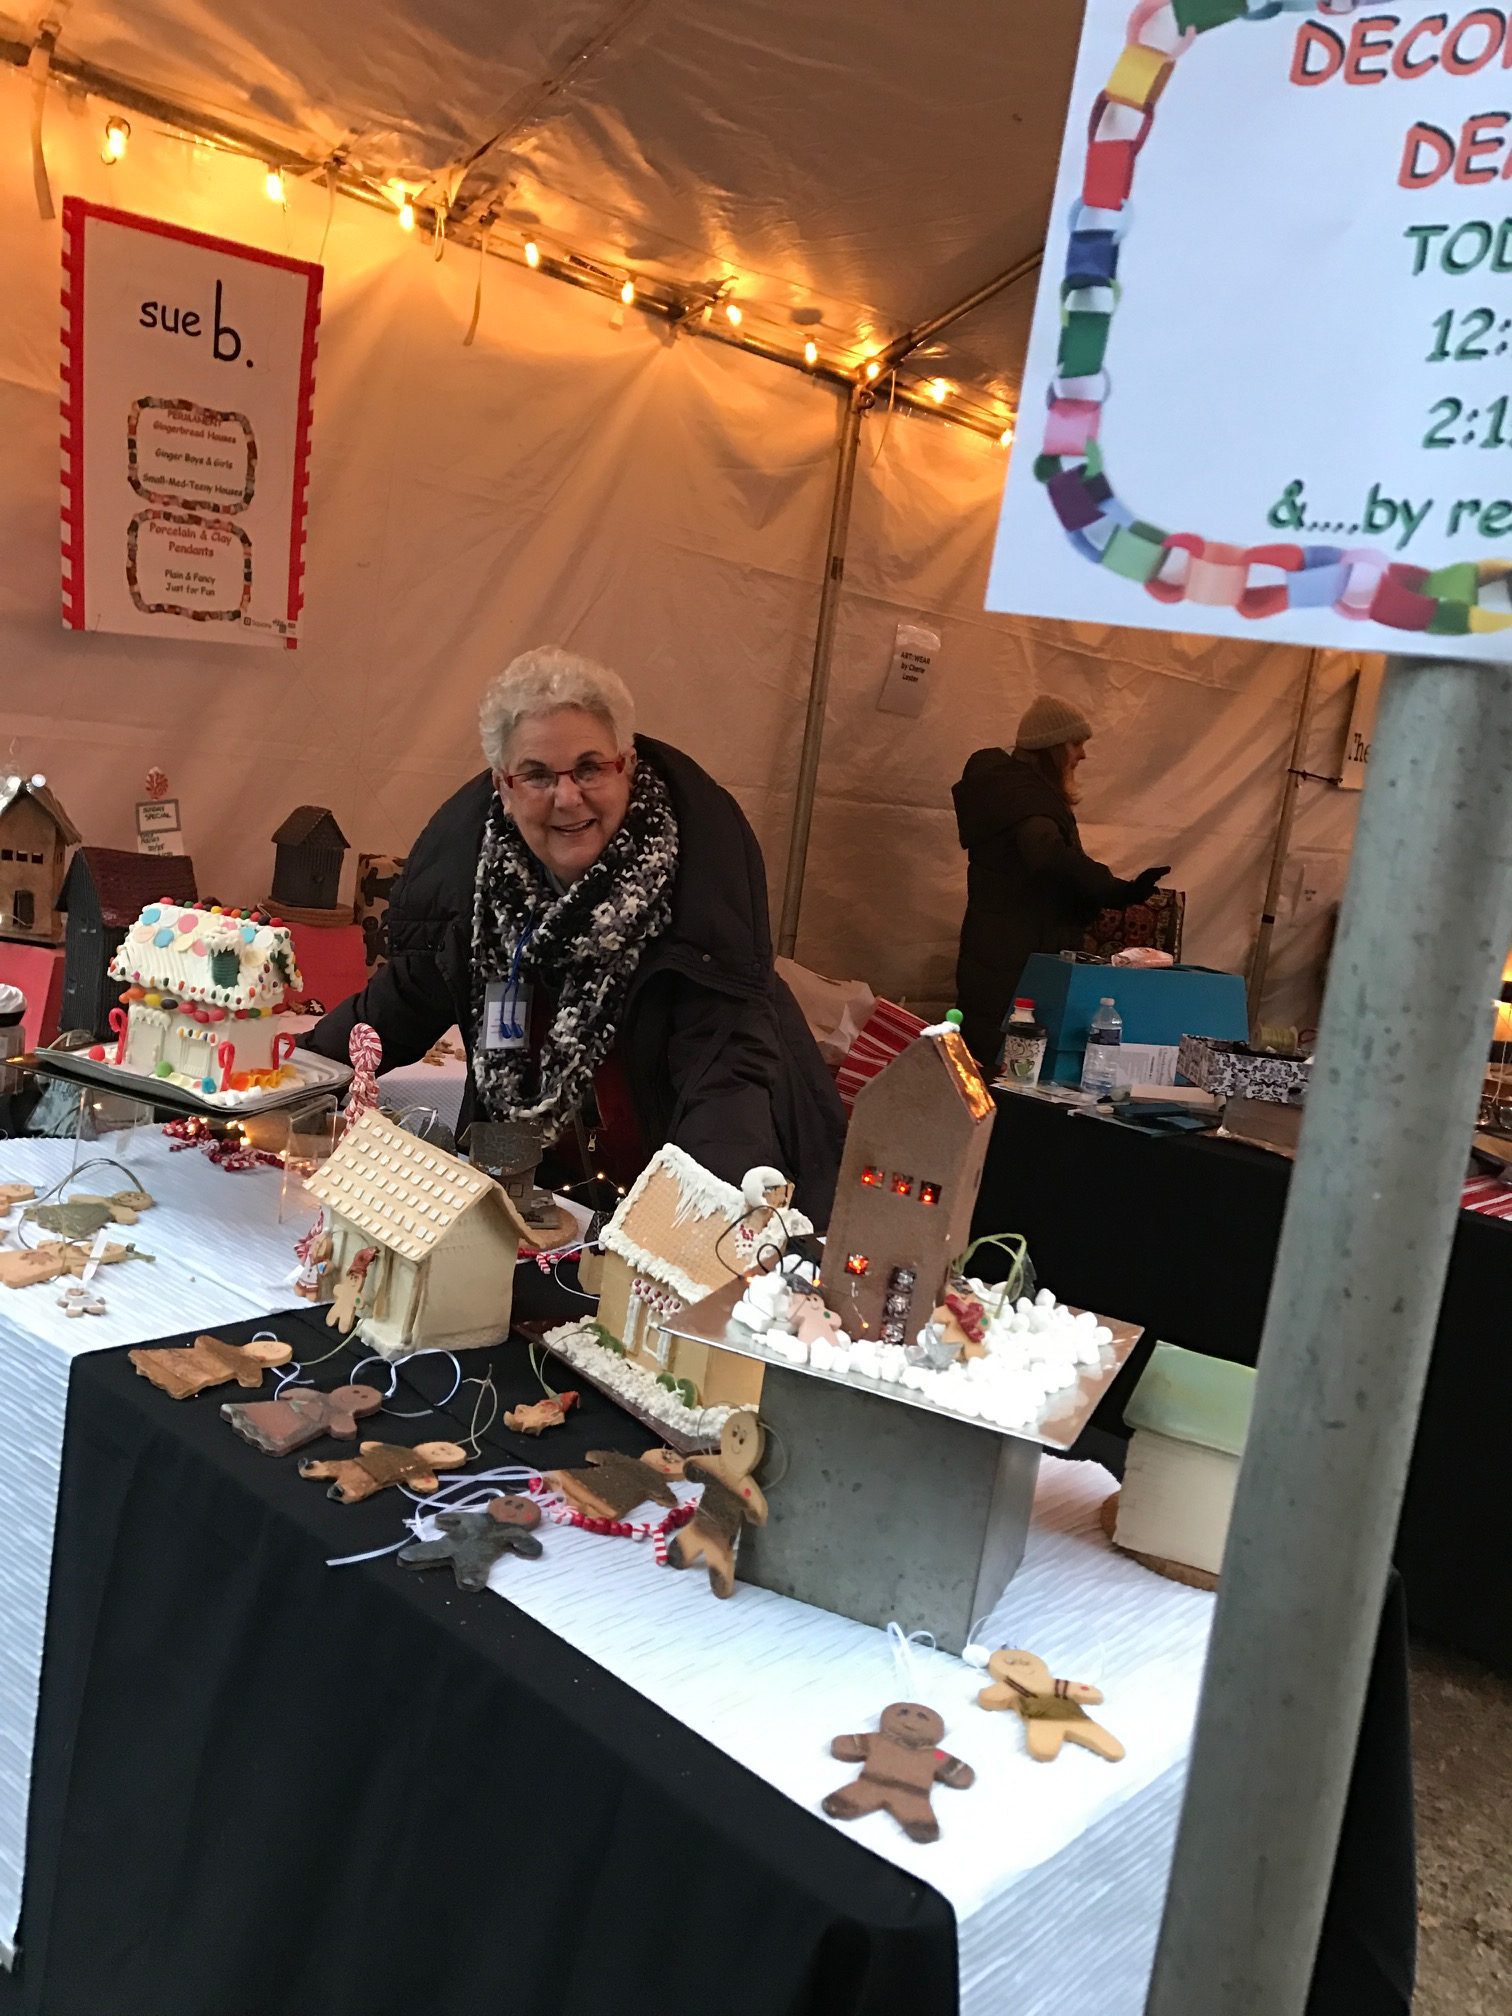 At the Holiday Market on F Street downtown.  